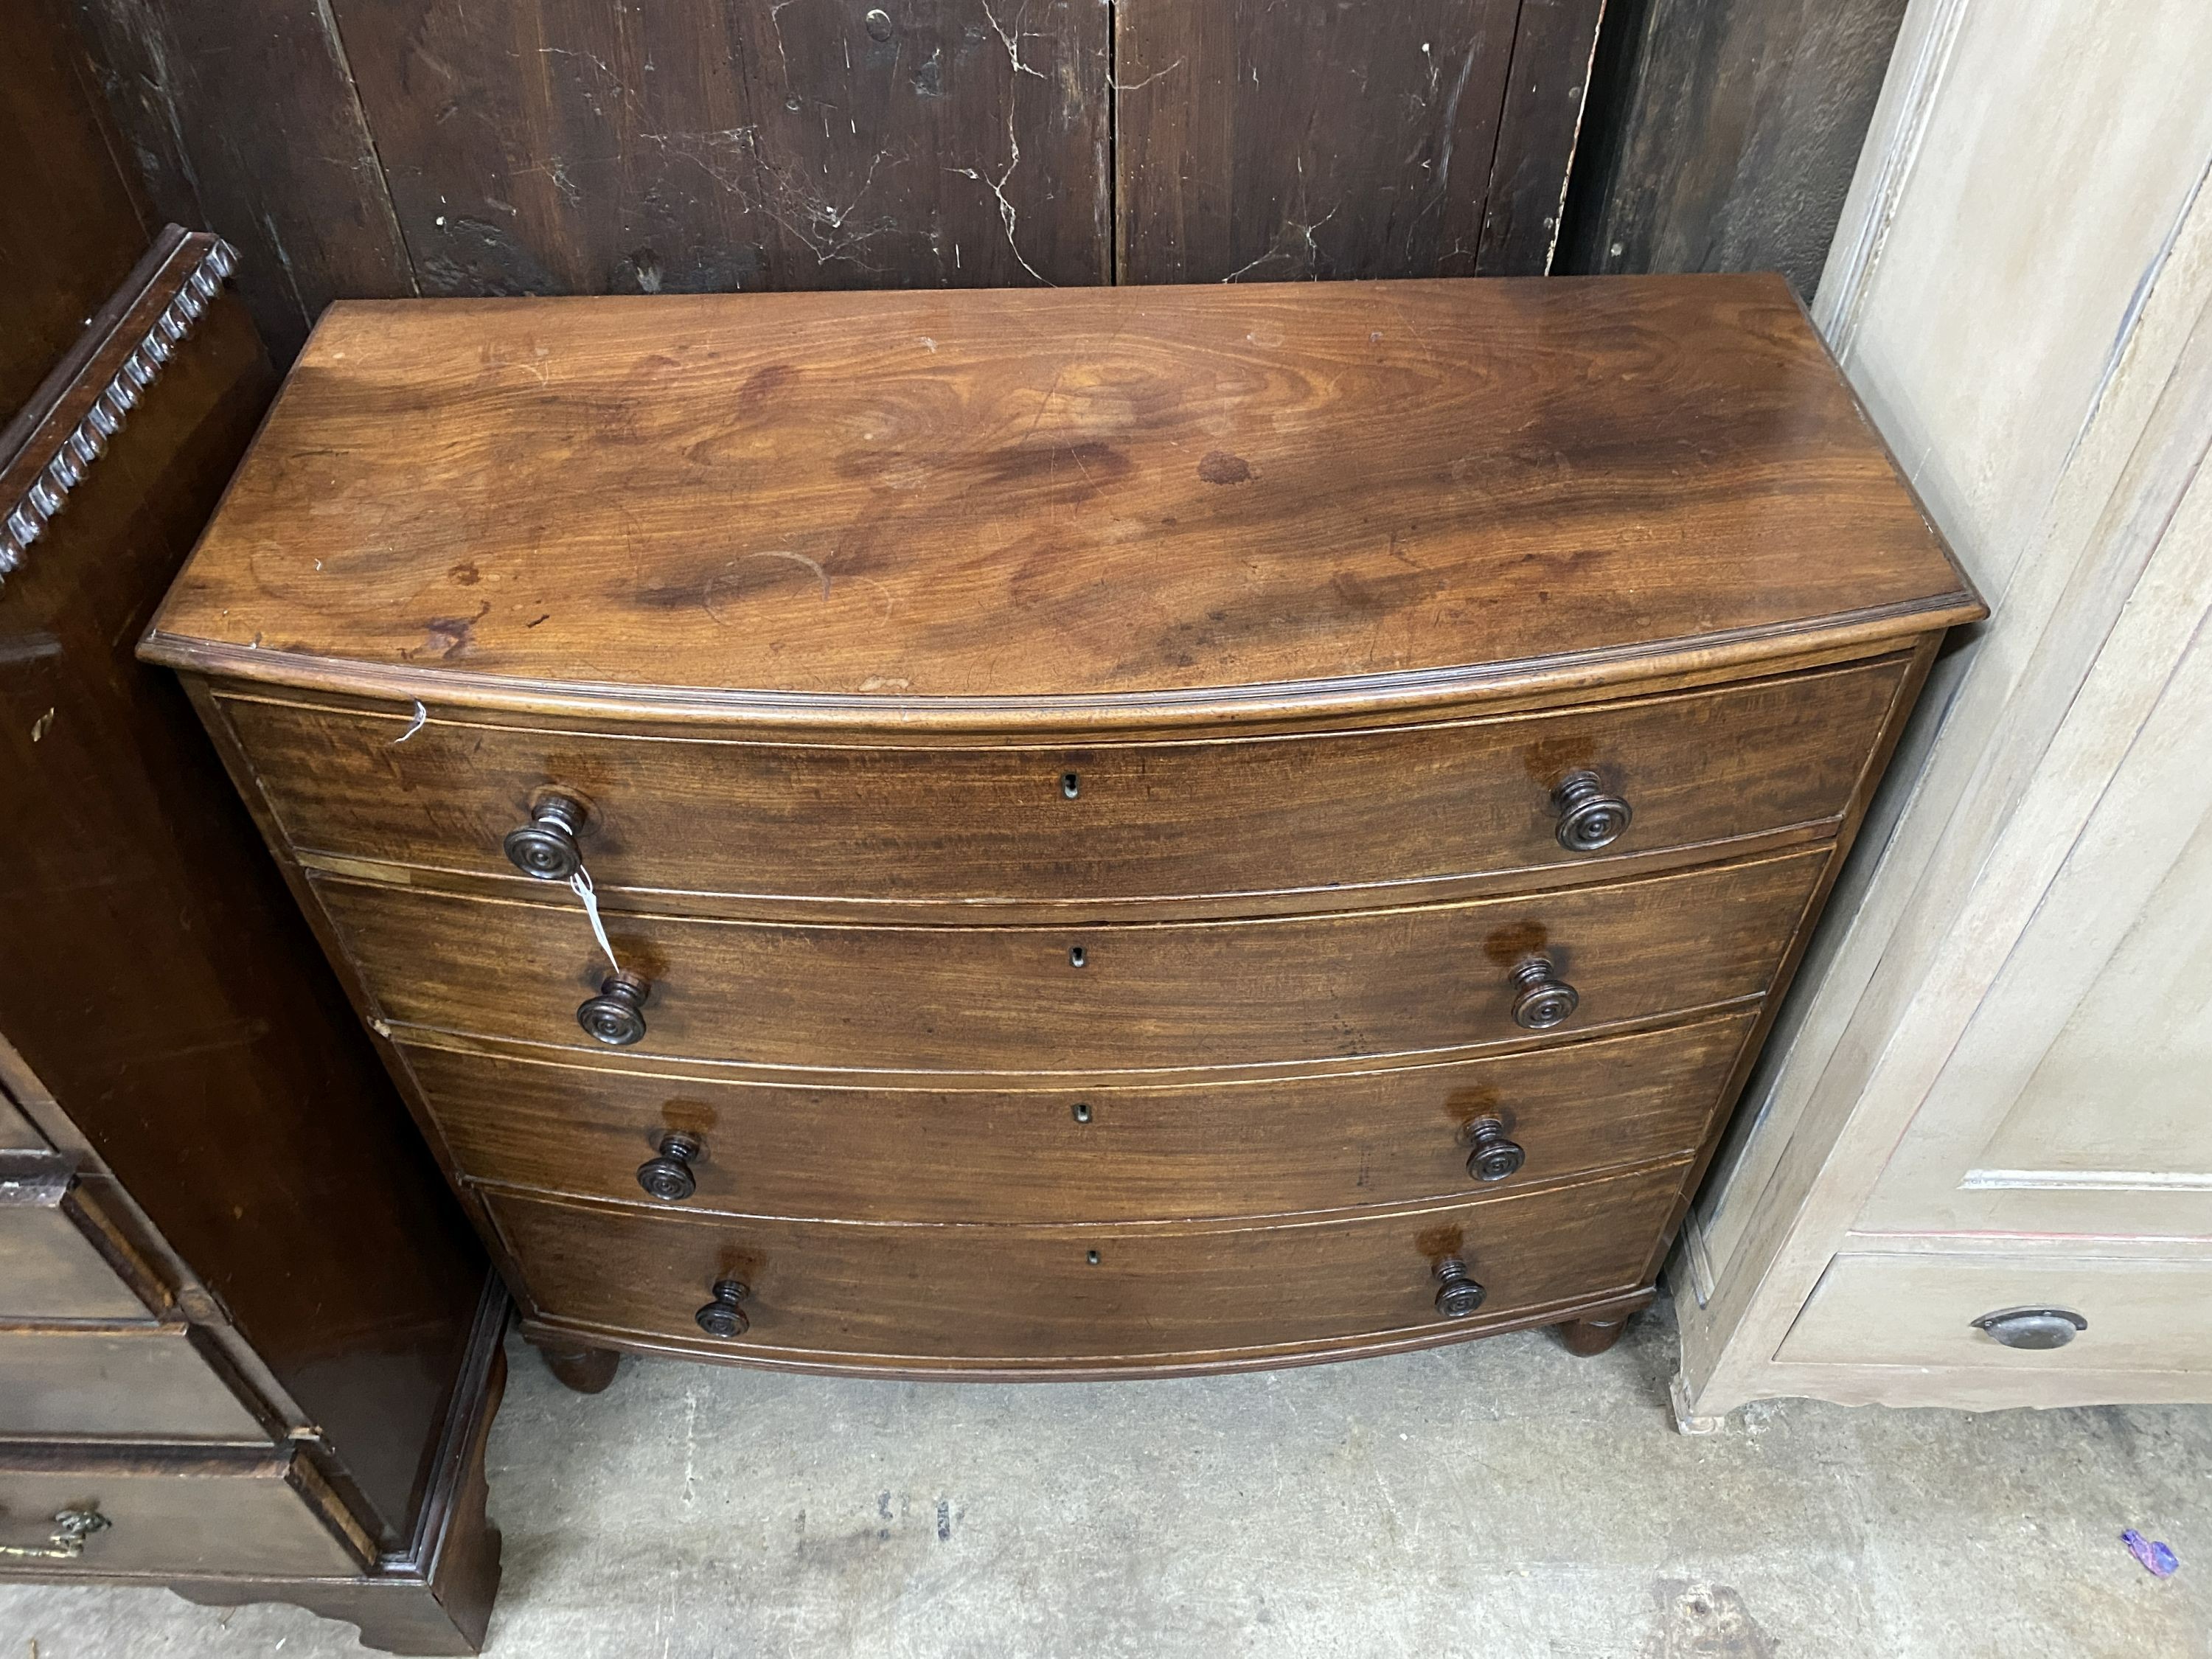 An early 19th century mahogany bowfront chest of drawers, width 119cm, depth 45cm, height 101cm